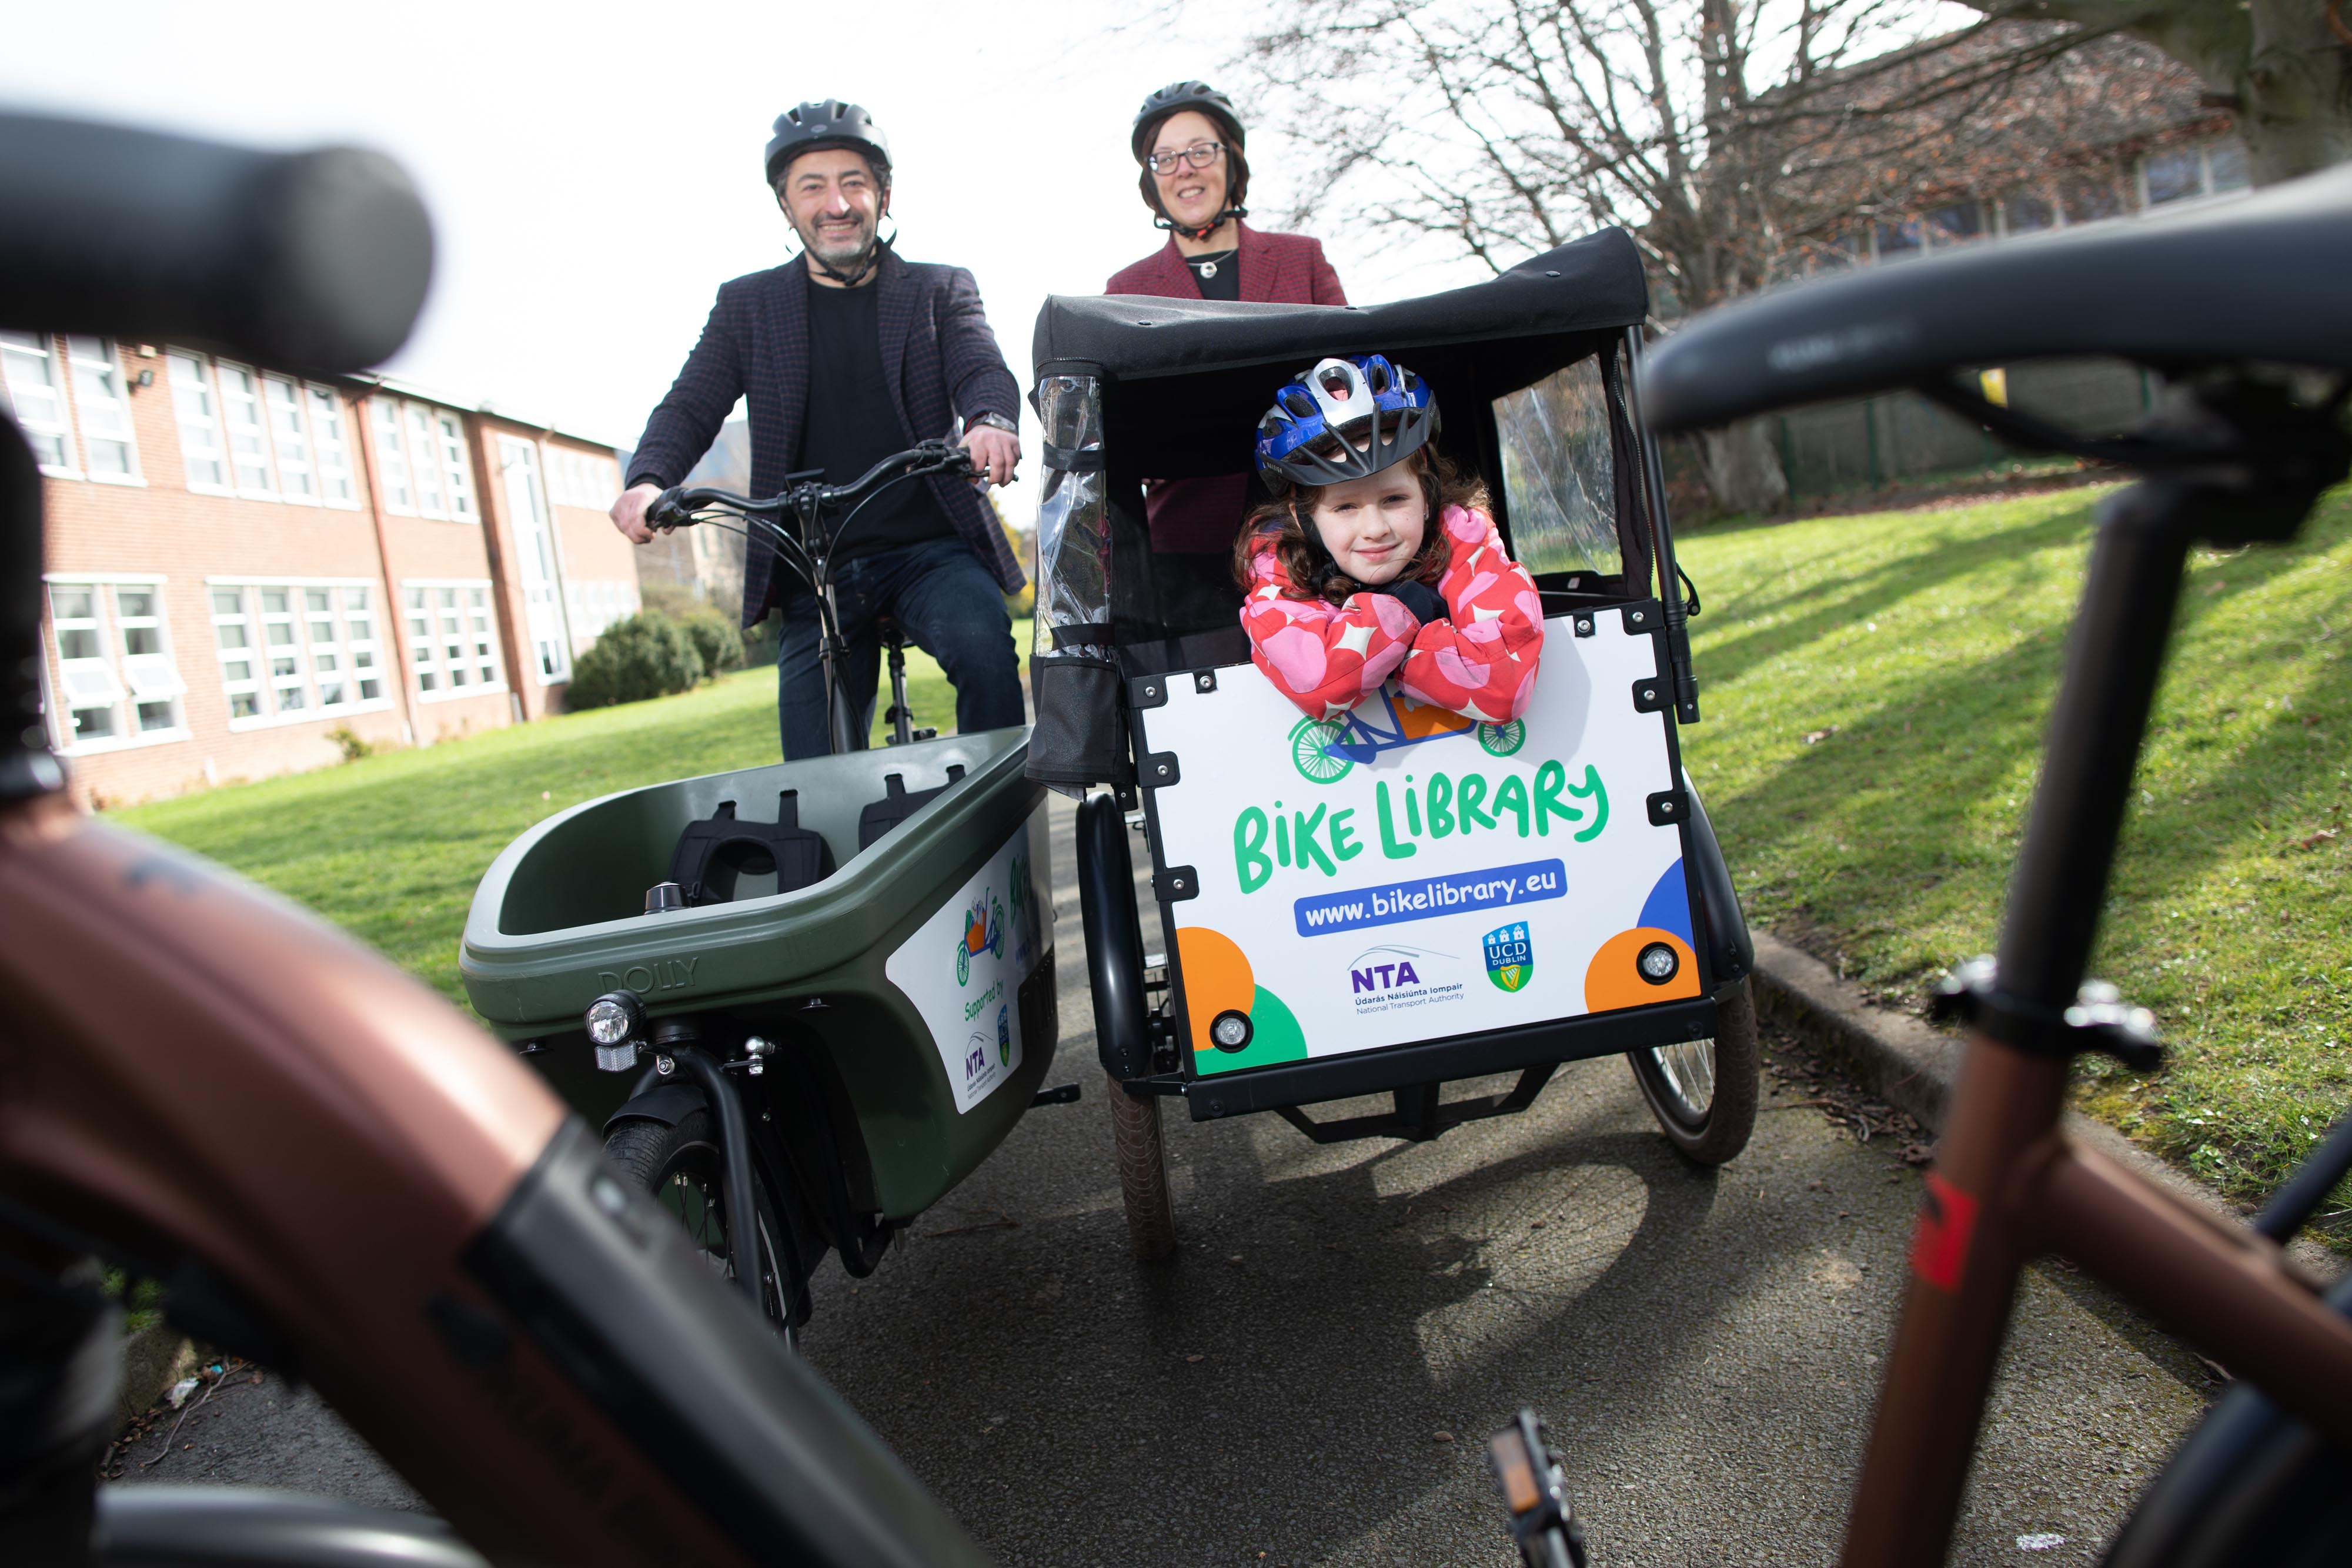 Anne Graham, Professor Francesco Pilla and Kaori McNulty (student at Assumption Senior National School, Walkinstown) at the launch of the Bike Library project.